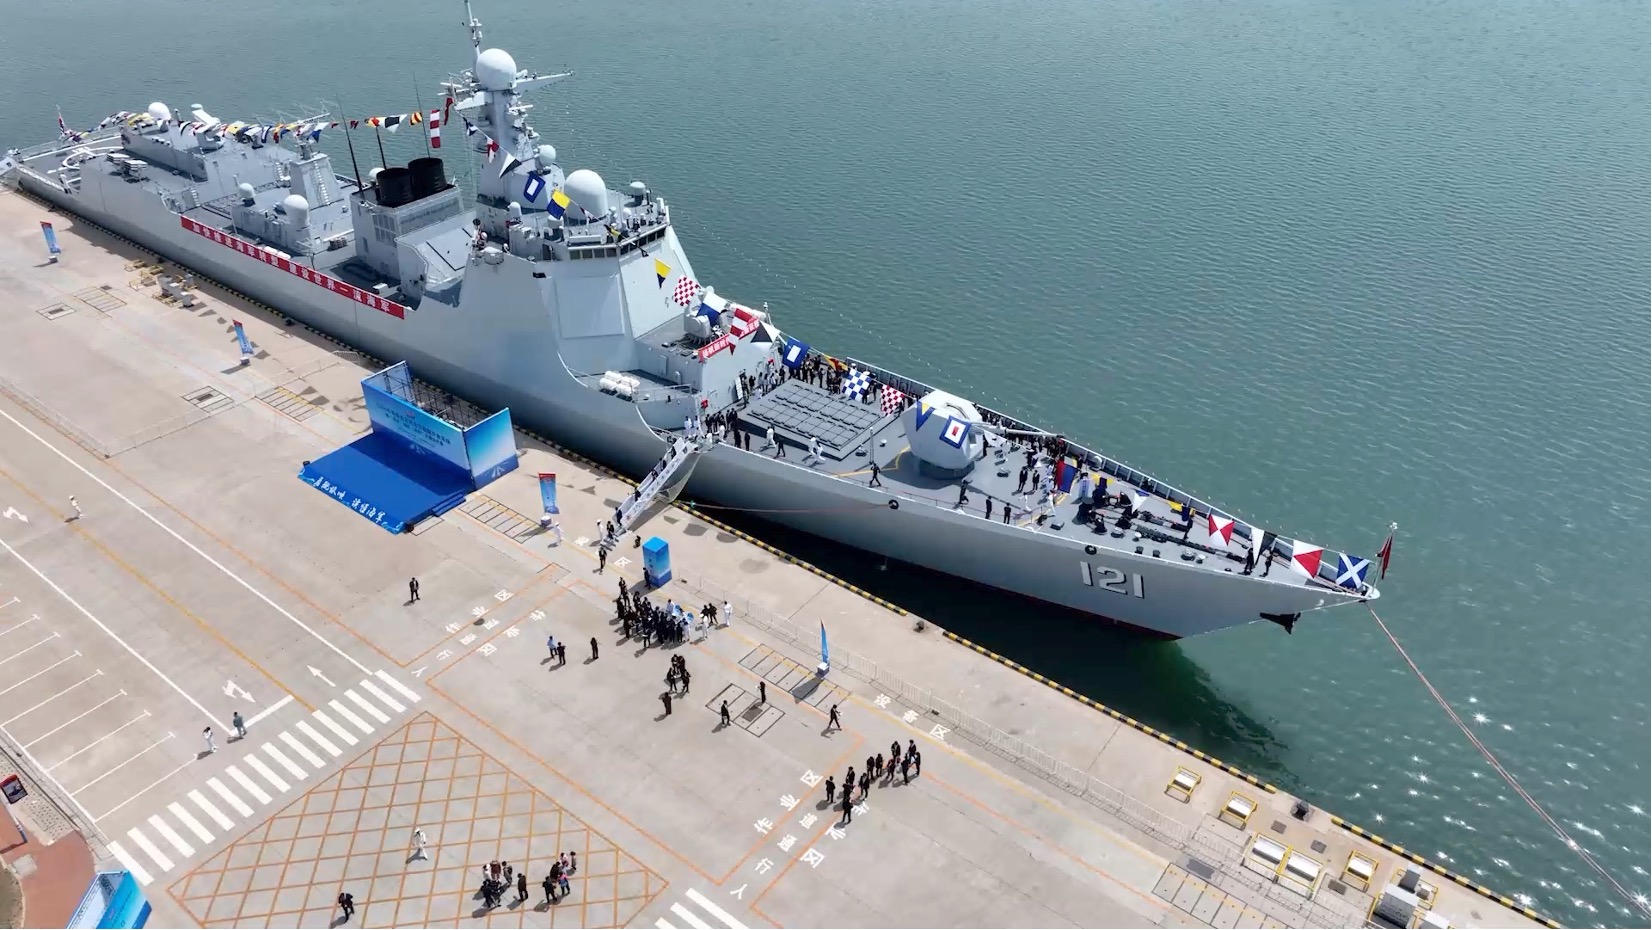 A photo of the Aegis, the Qiqihar – a type 052D guided-missile destroyer that is a part of the PLA Navy. /CGTN